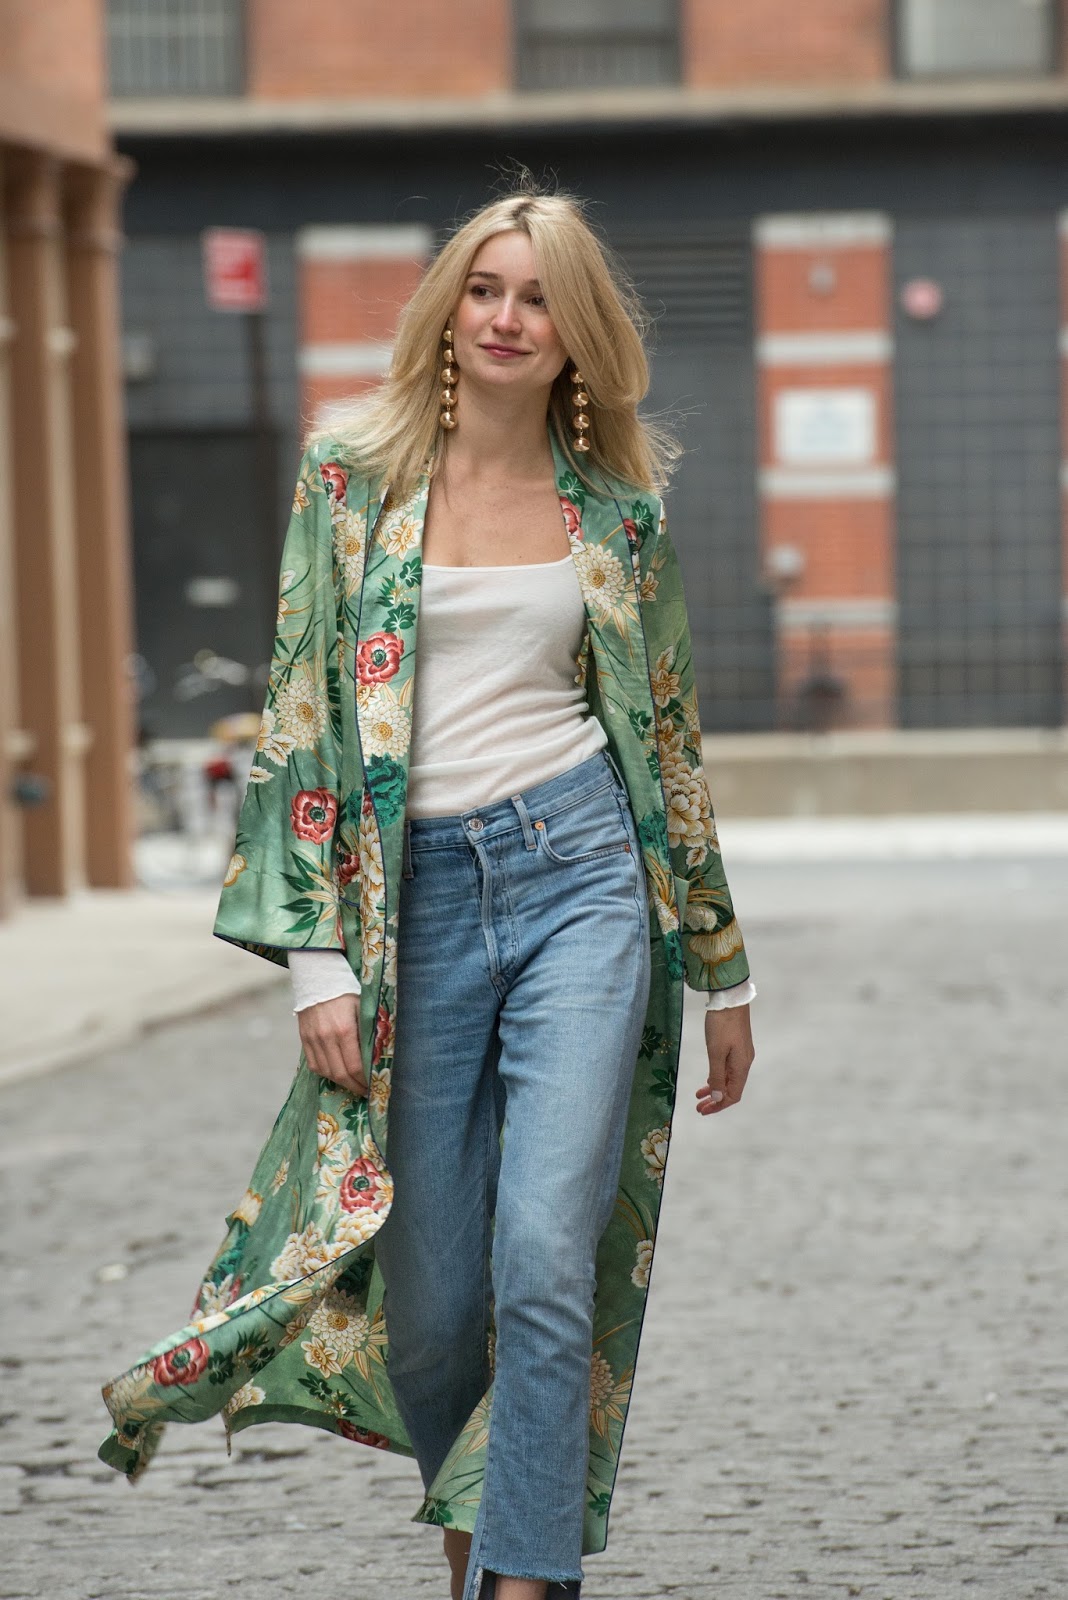 NYC DINNER DATES: WHERE TO GO, WHAT TO WEAR | The New York Blonde | New